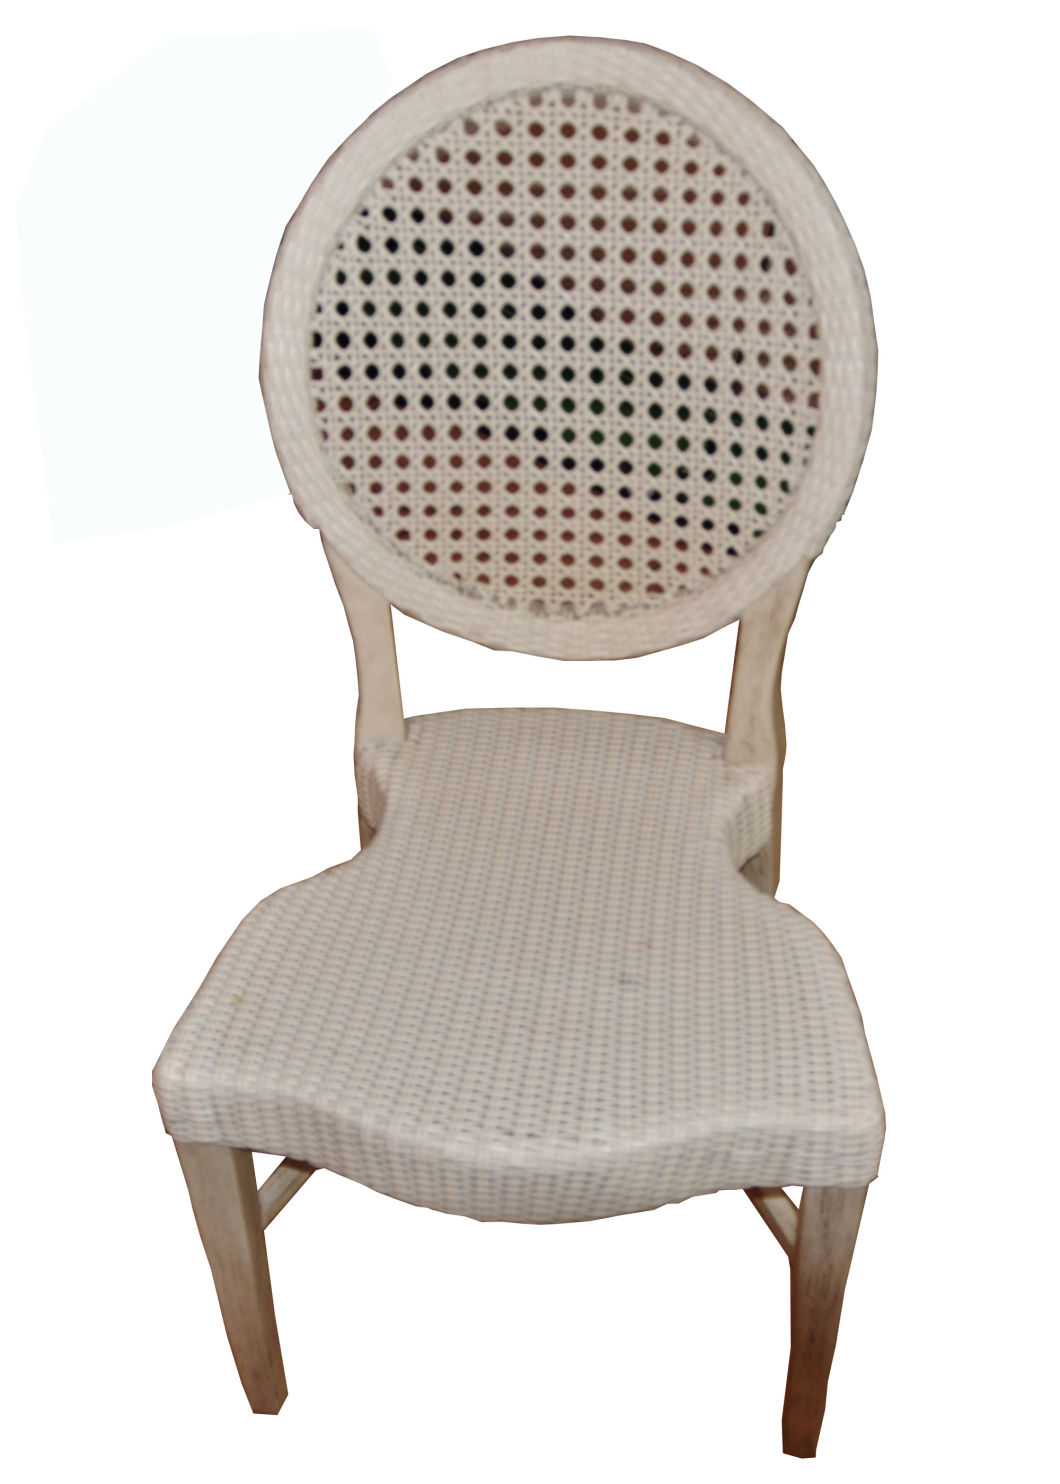 European Style Outdoor Chair Patio Outdoor Rattan Home Hotel Garden Polywood Dining Chair